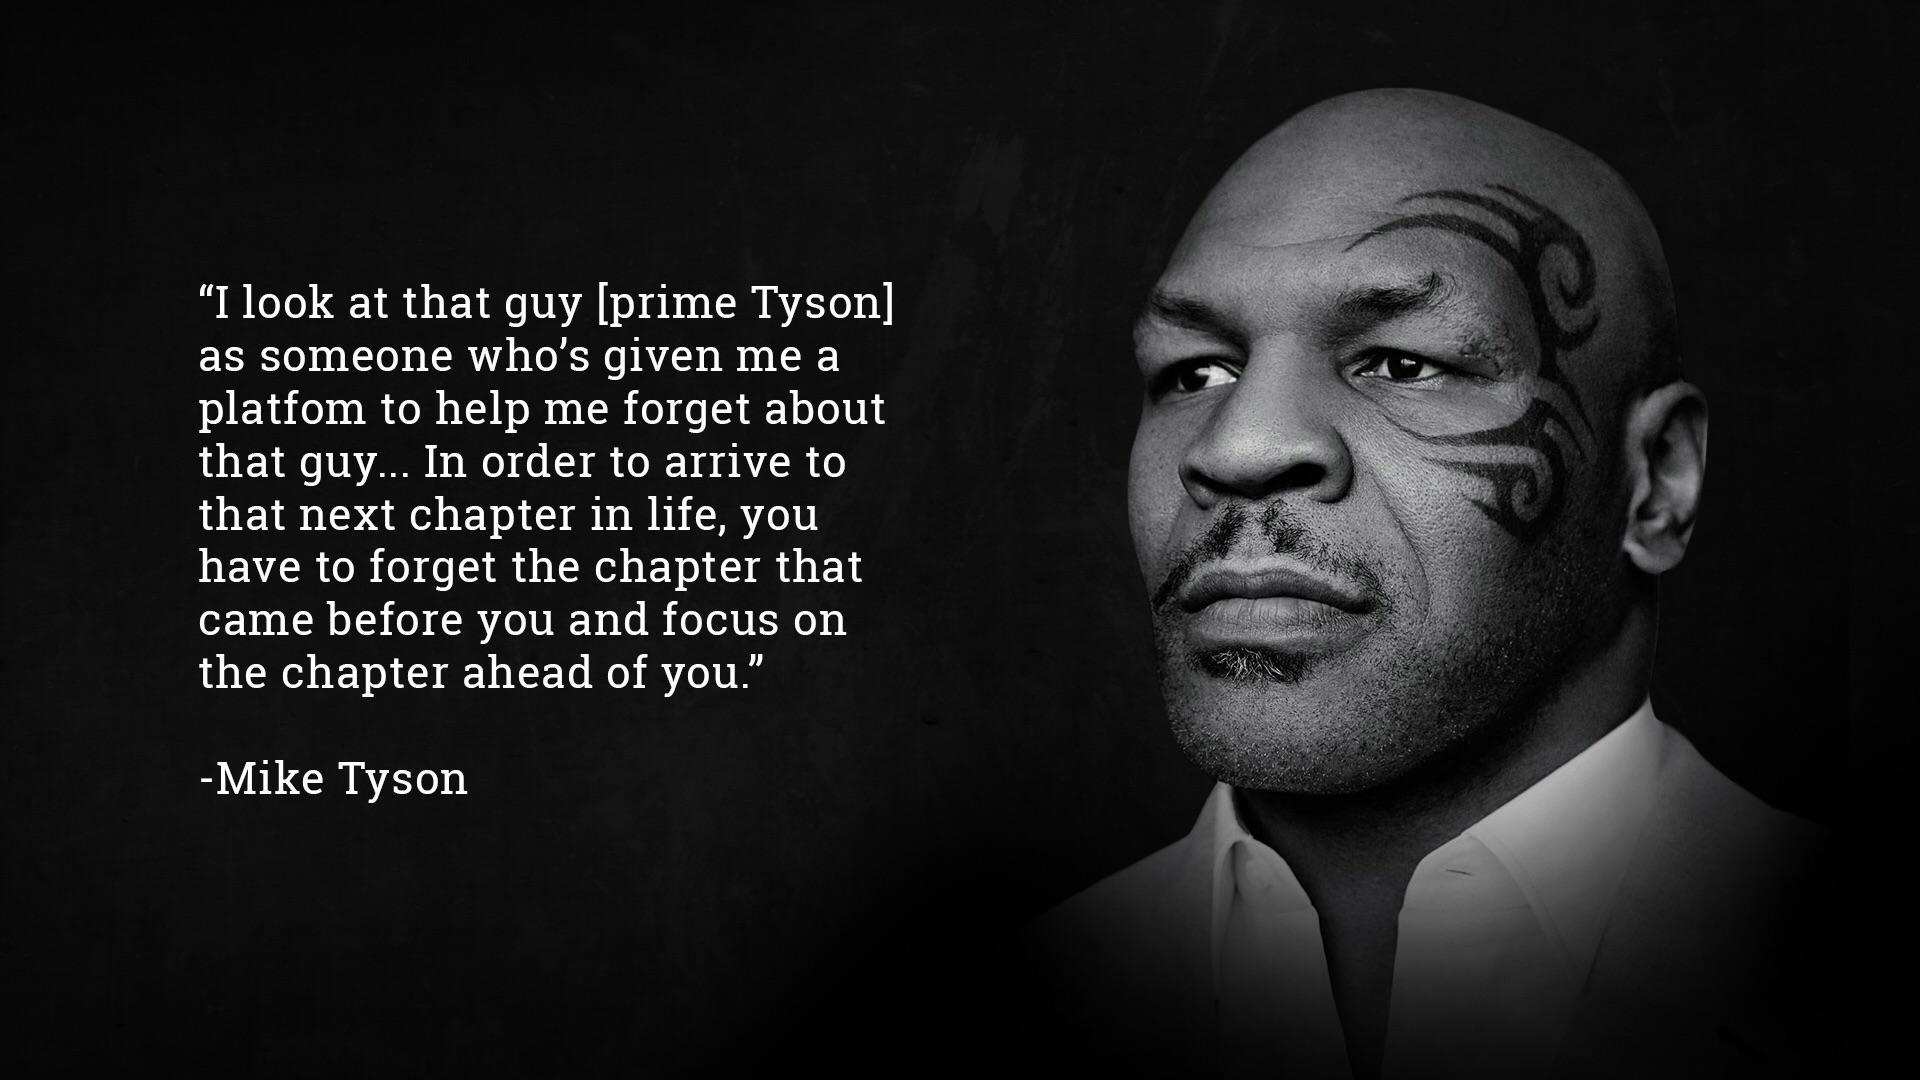 Mike Tyson Quotes Image